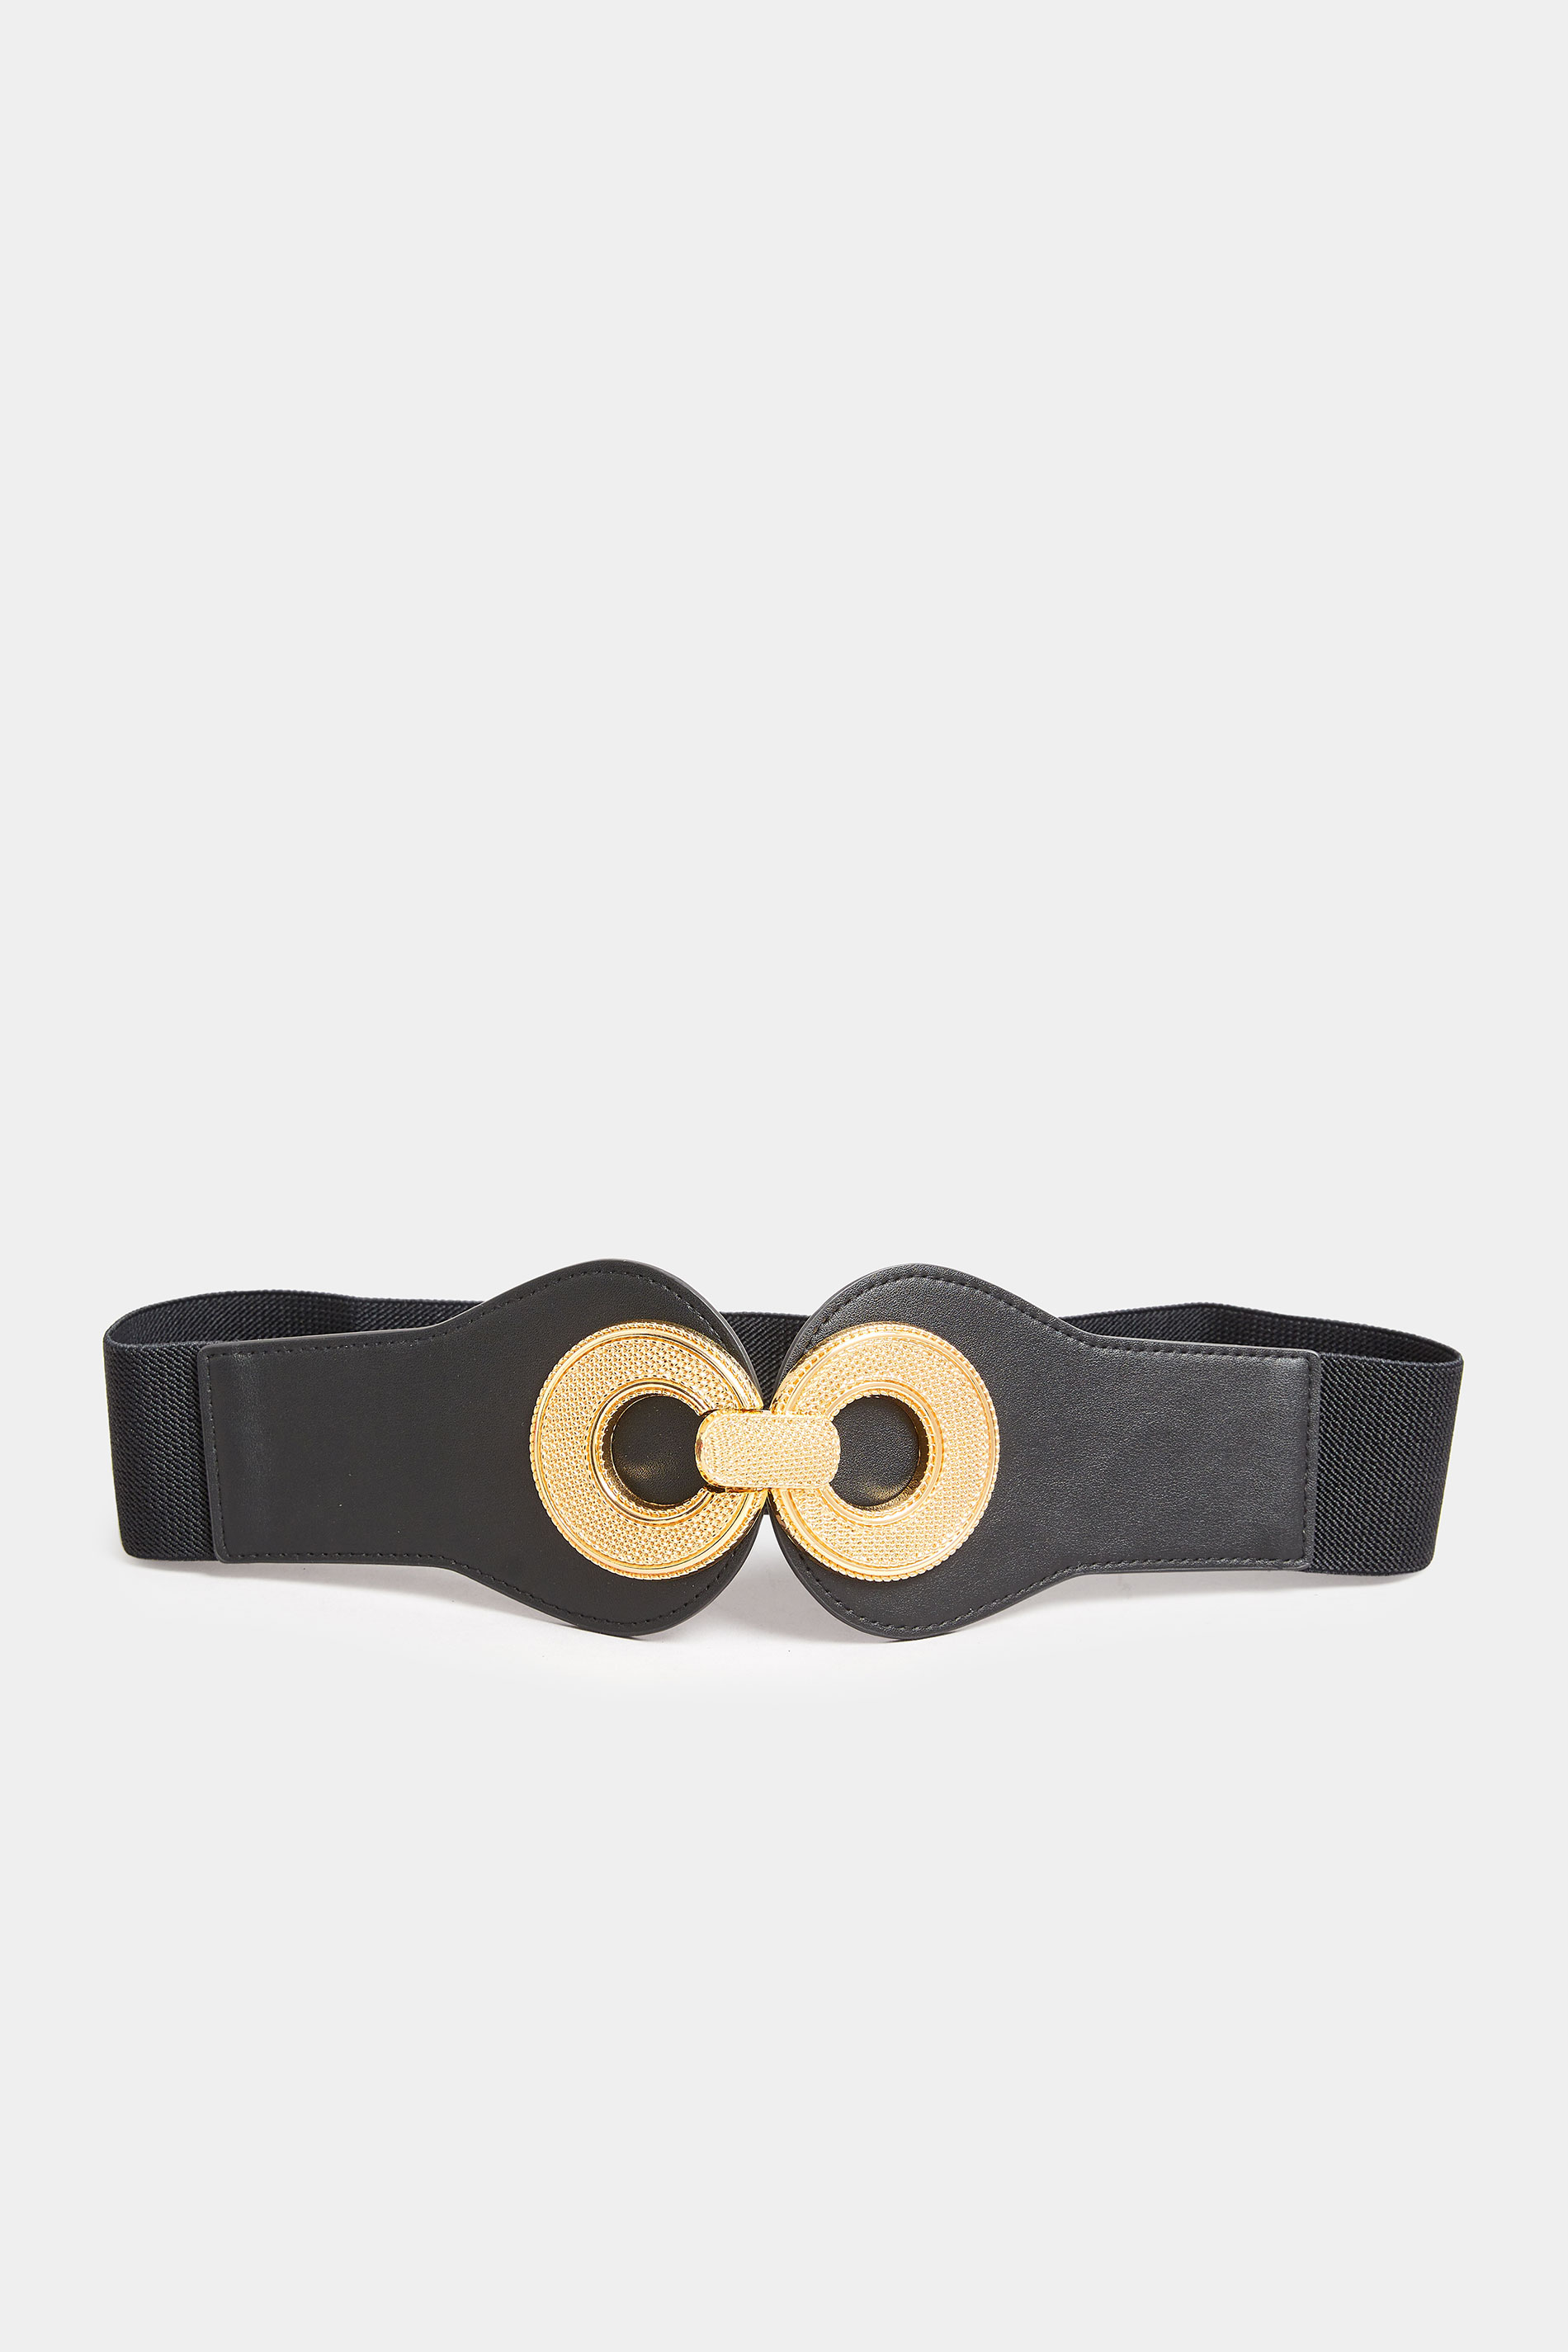 Black & Gold Double Circle Wide Stretch Belt | Yours Clothing 2